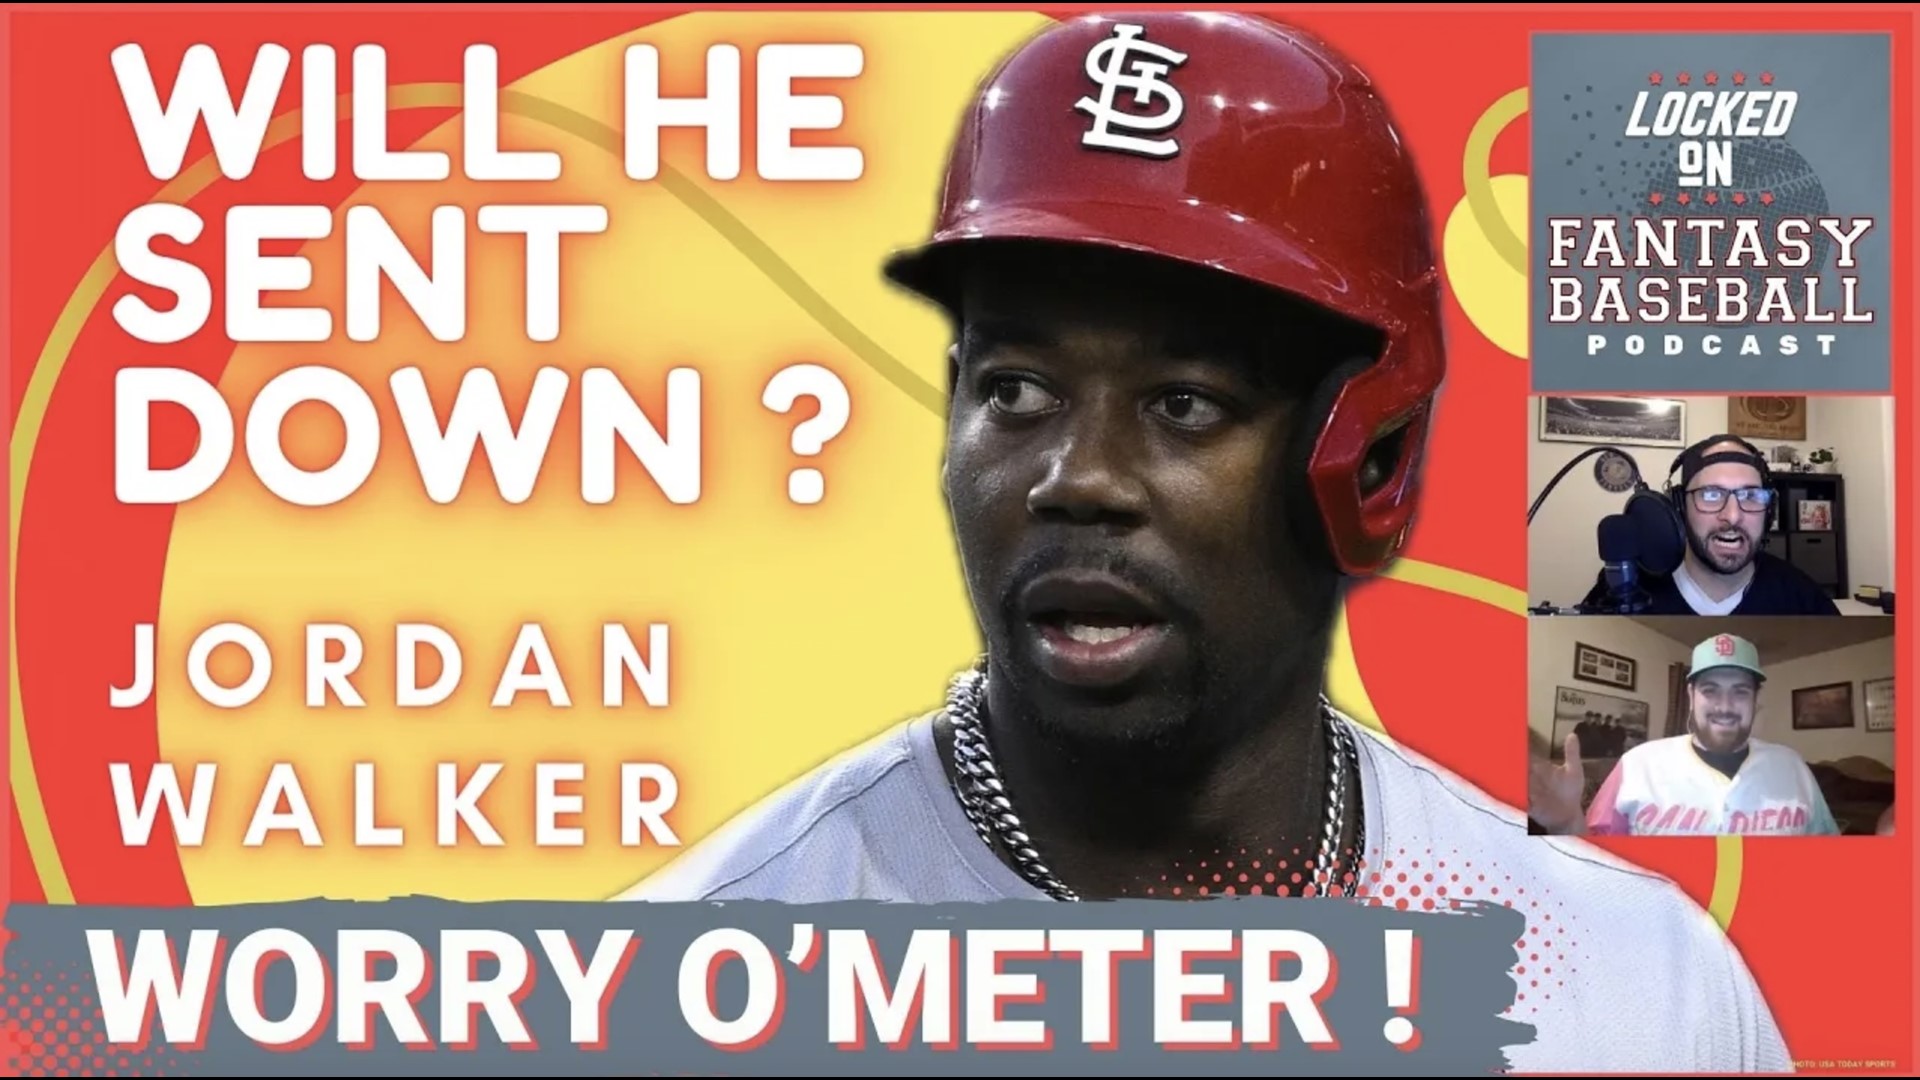 Locked On Fantasy Baseball Is Here With Worry O'Meter Wednesdays ! Matt Is talking about what to do with guys like Jordan Walker and Christian Encarnacion-Strand !